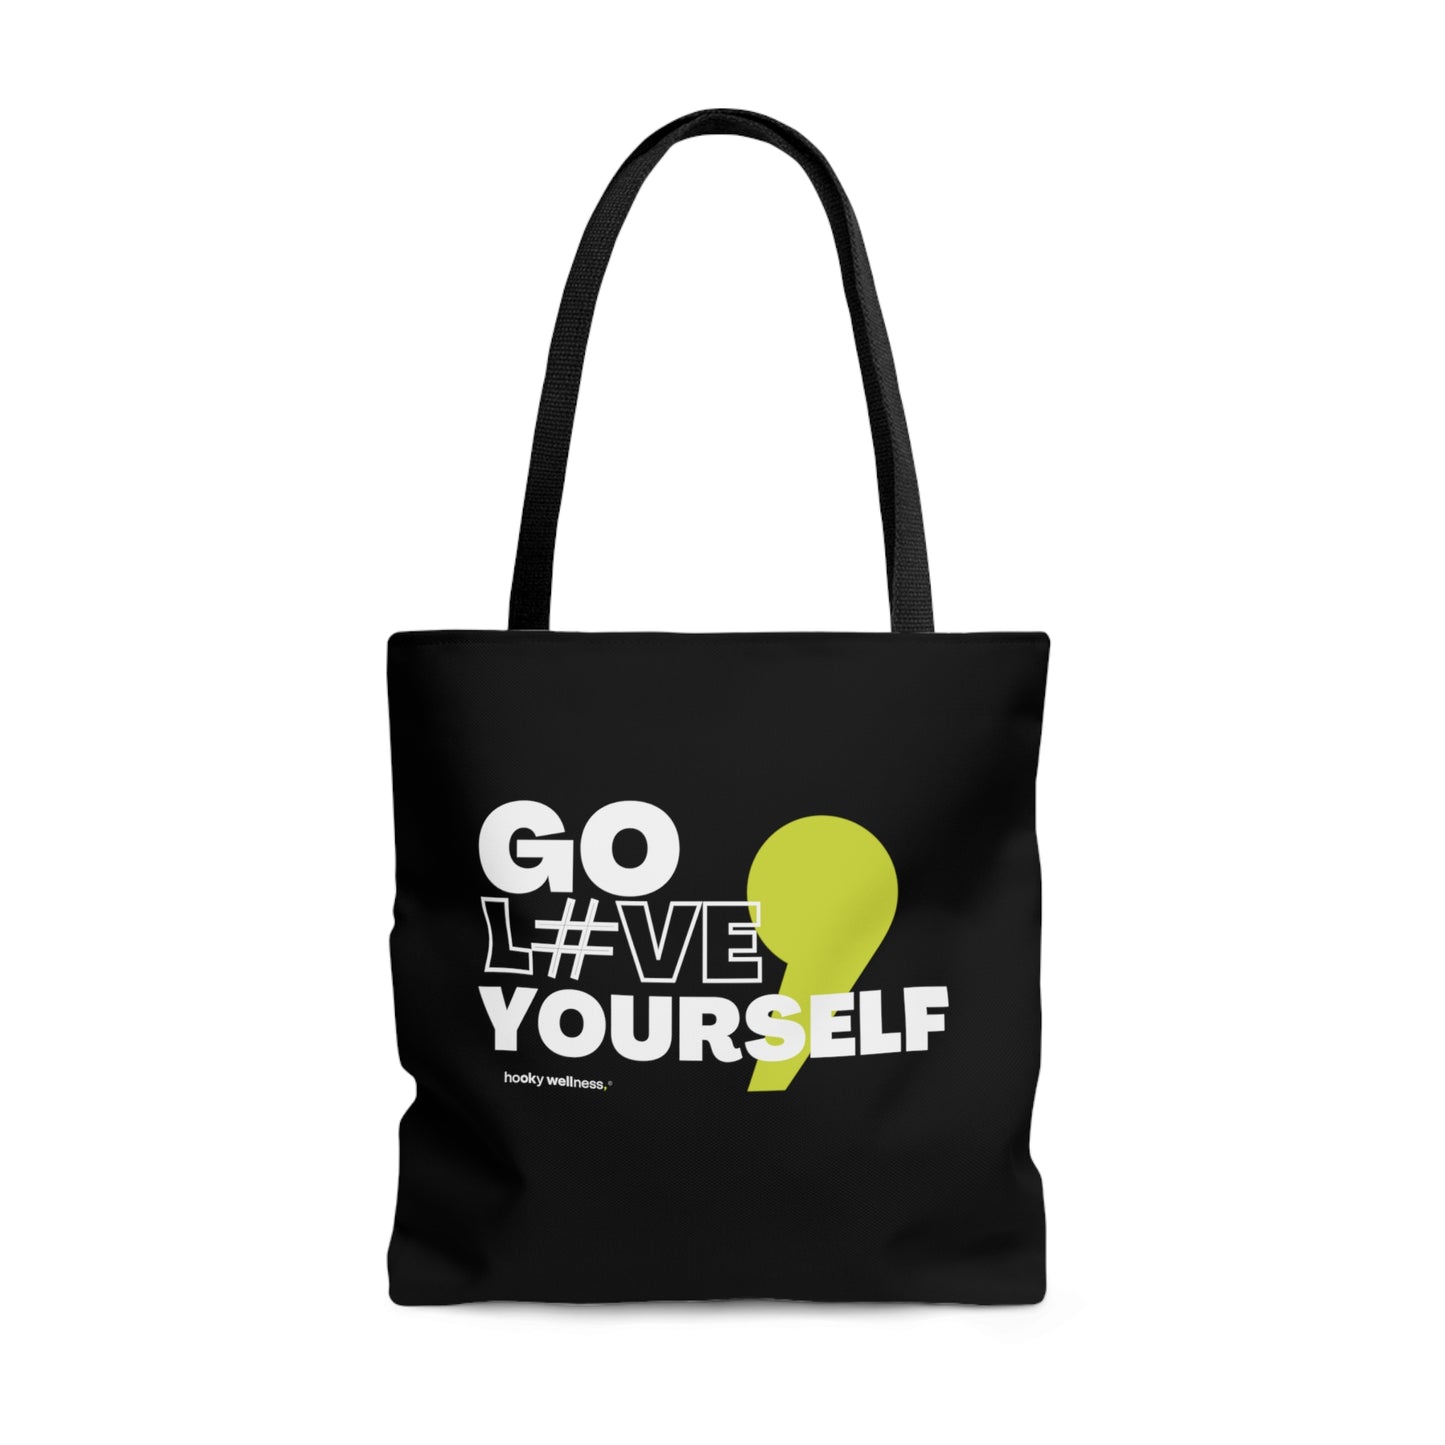 Go L#ve Yourself Large Tote